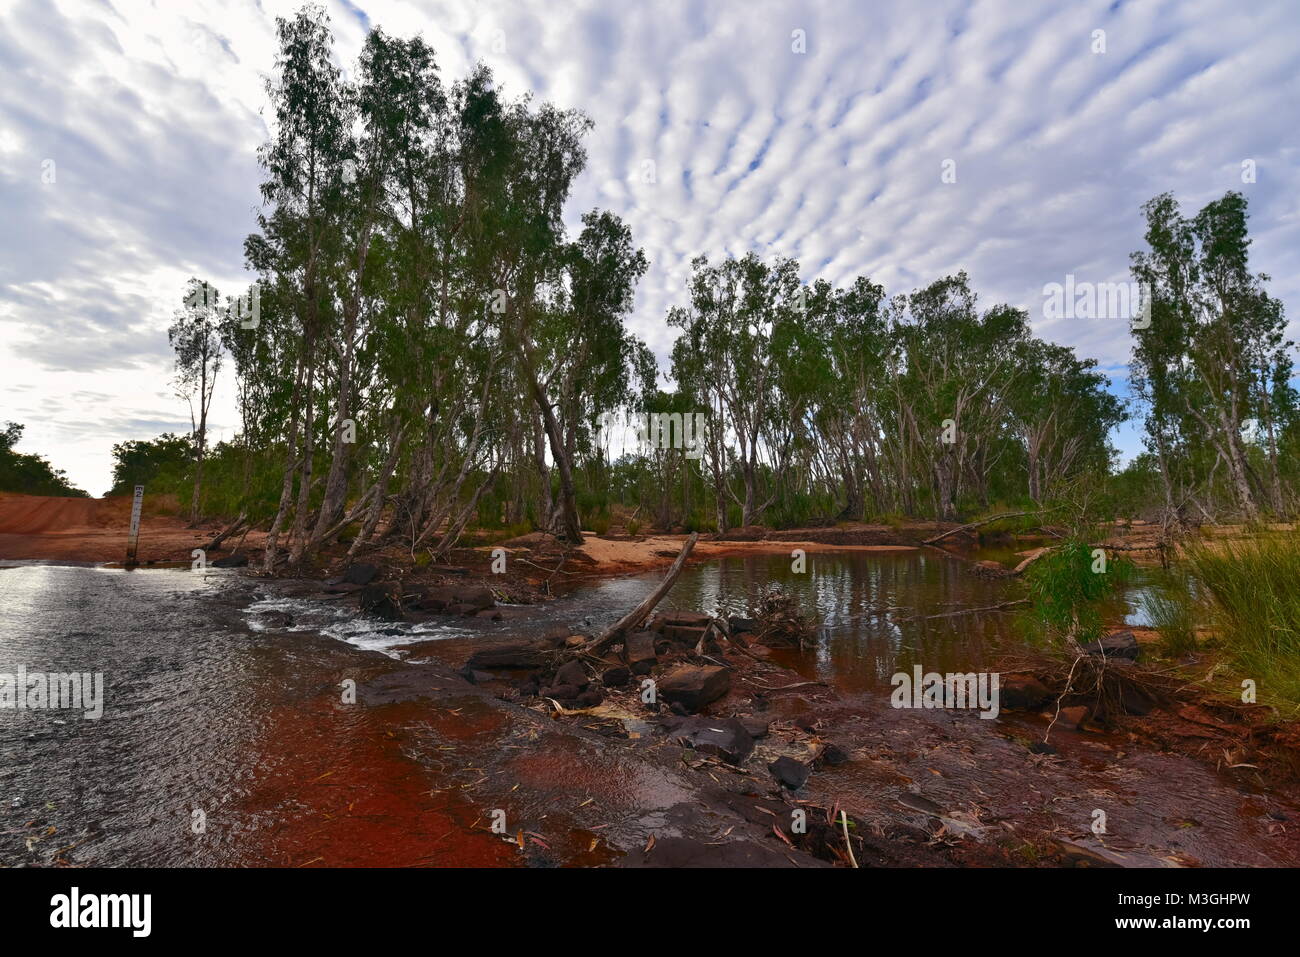 Magnificent Galvans Gorge on the Gibb River Road Kimberly Region in Western Australia Stock Photo